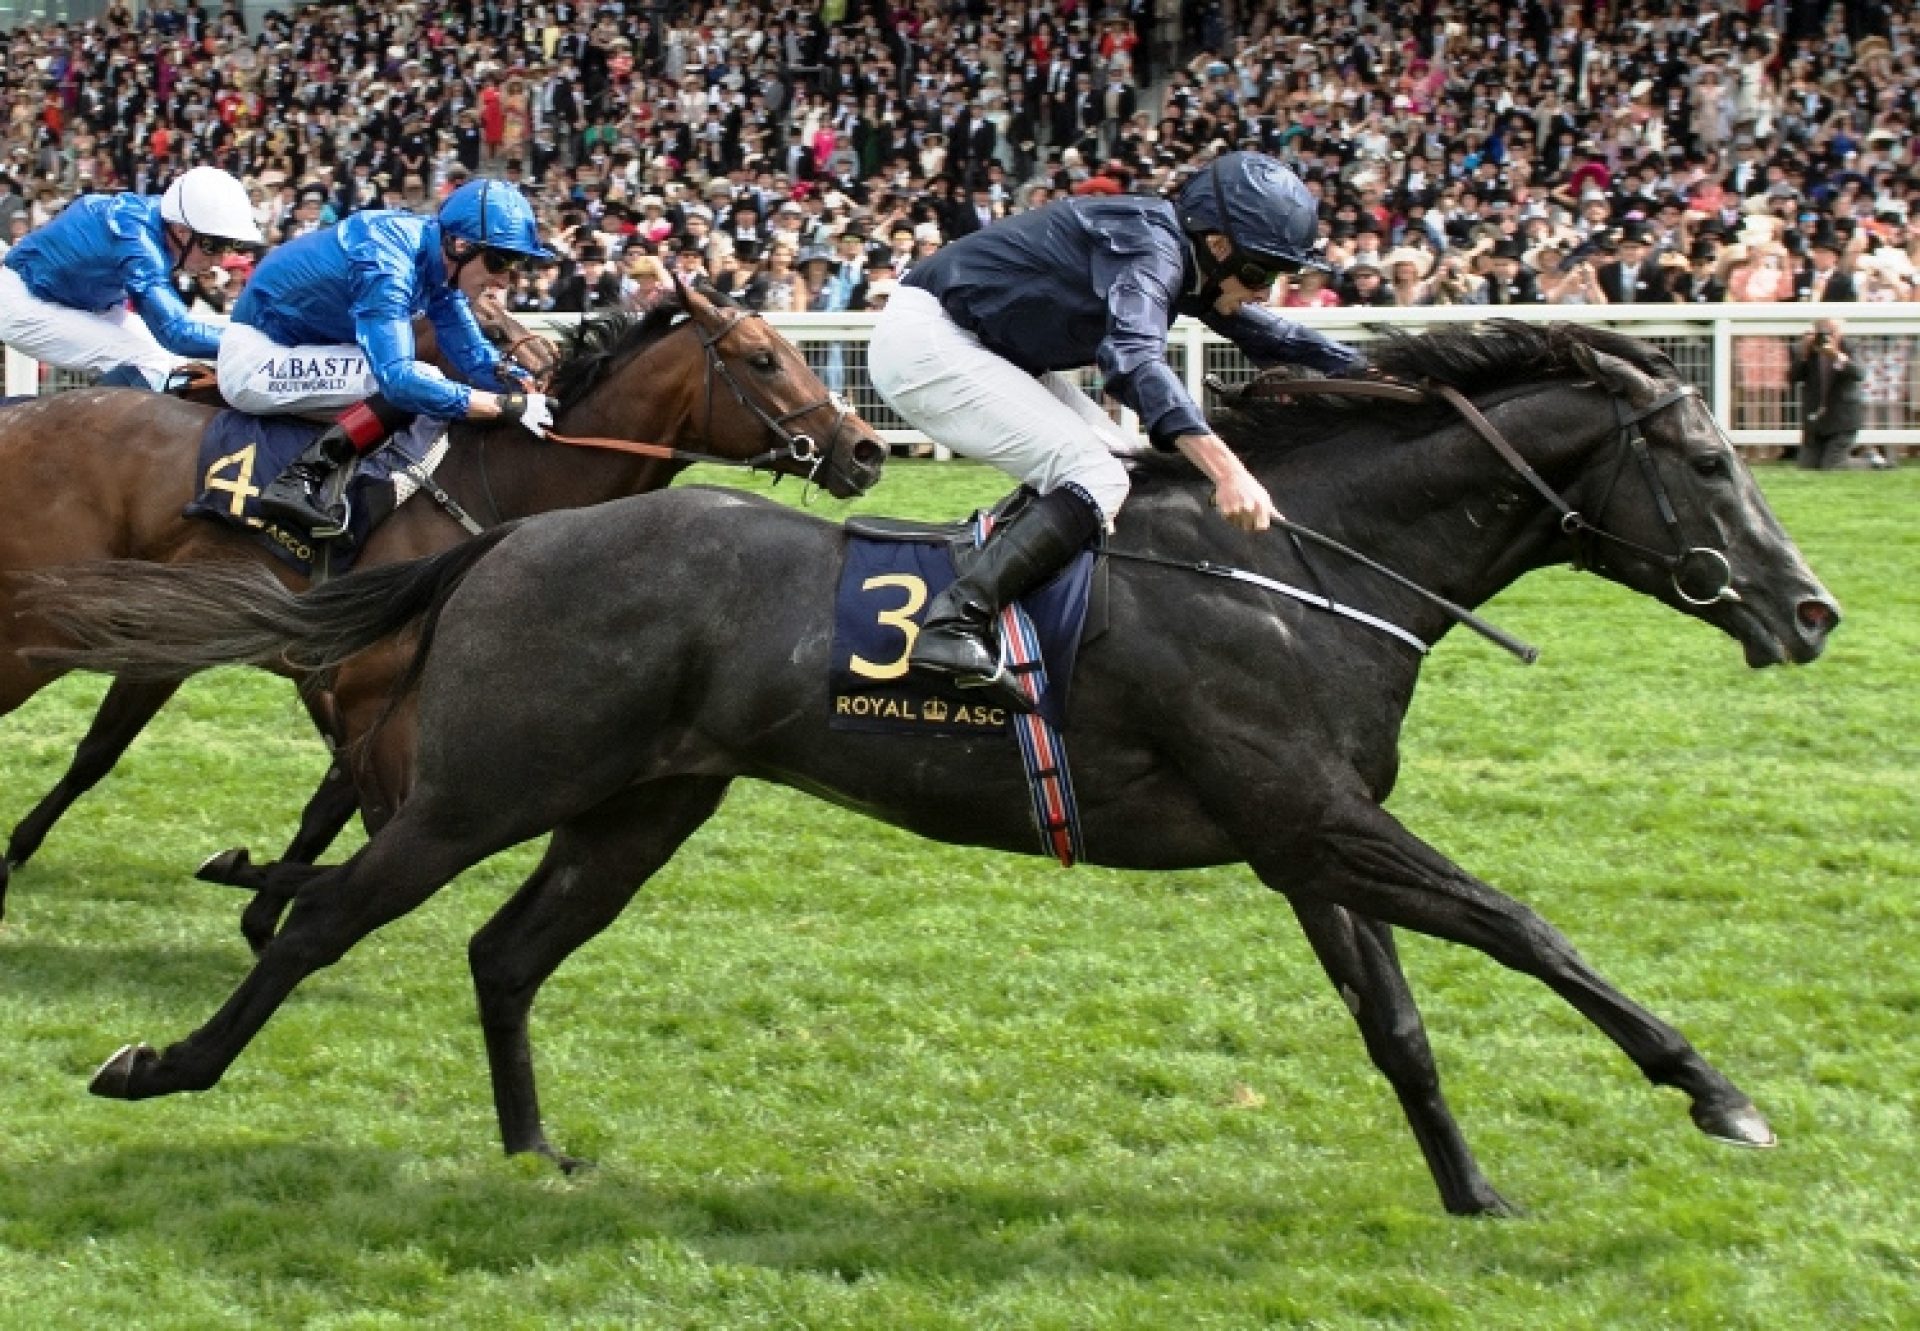 Caravaggio winning the G1 Commonwealth Cup at Royal Ascot